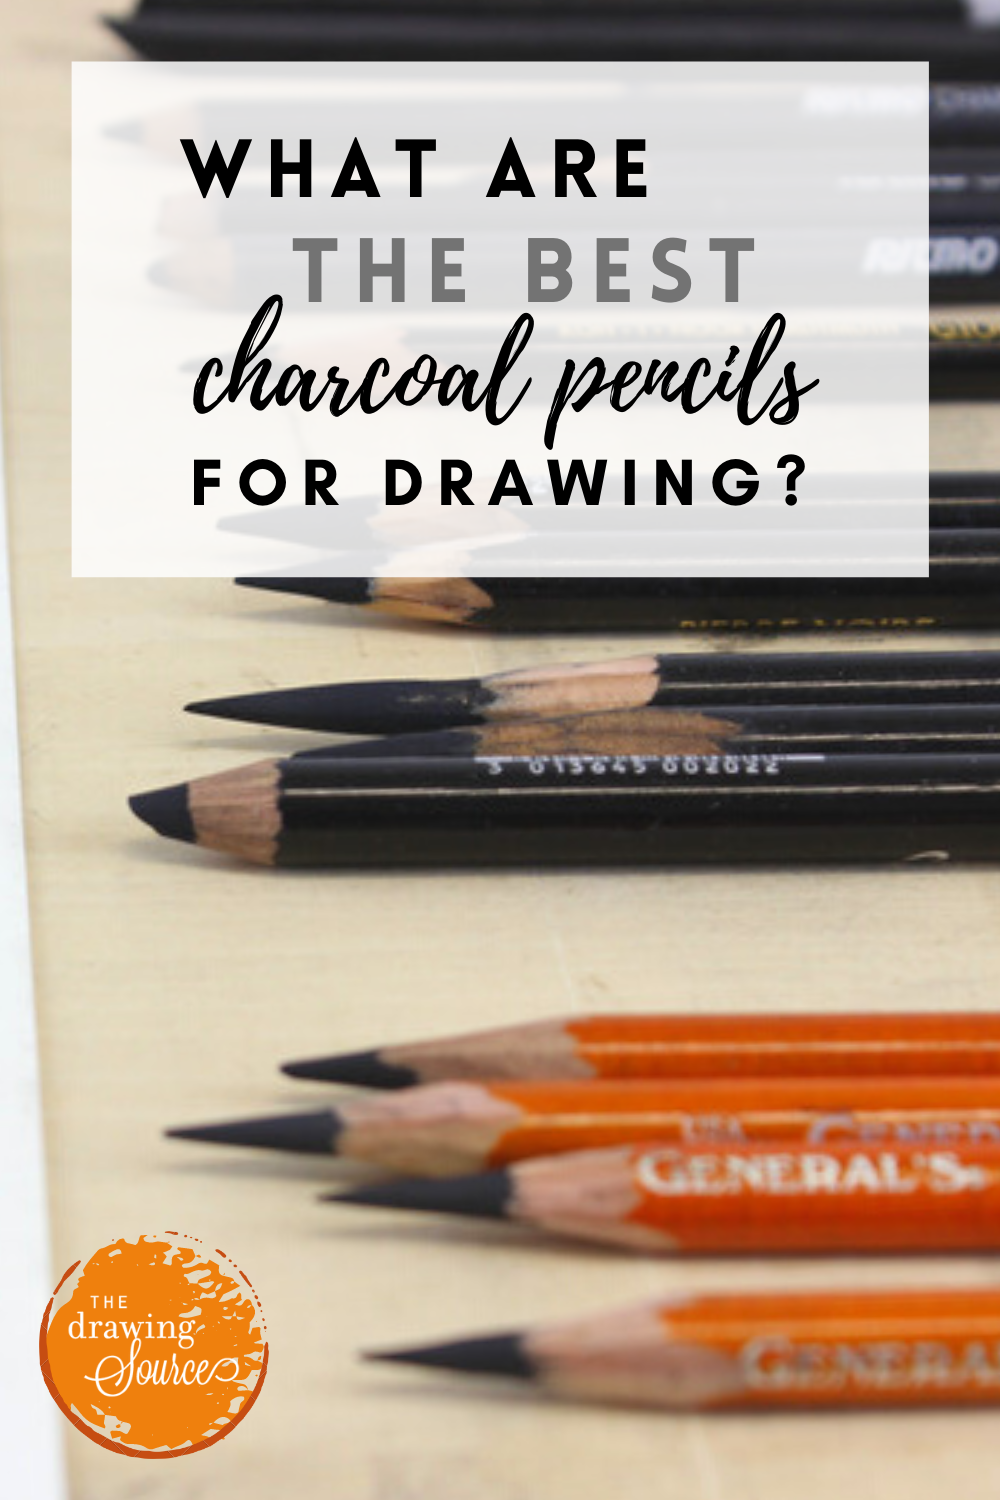 Best Charcoal pencils for Artists//Camlin, General, Derwent, Conte